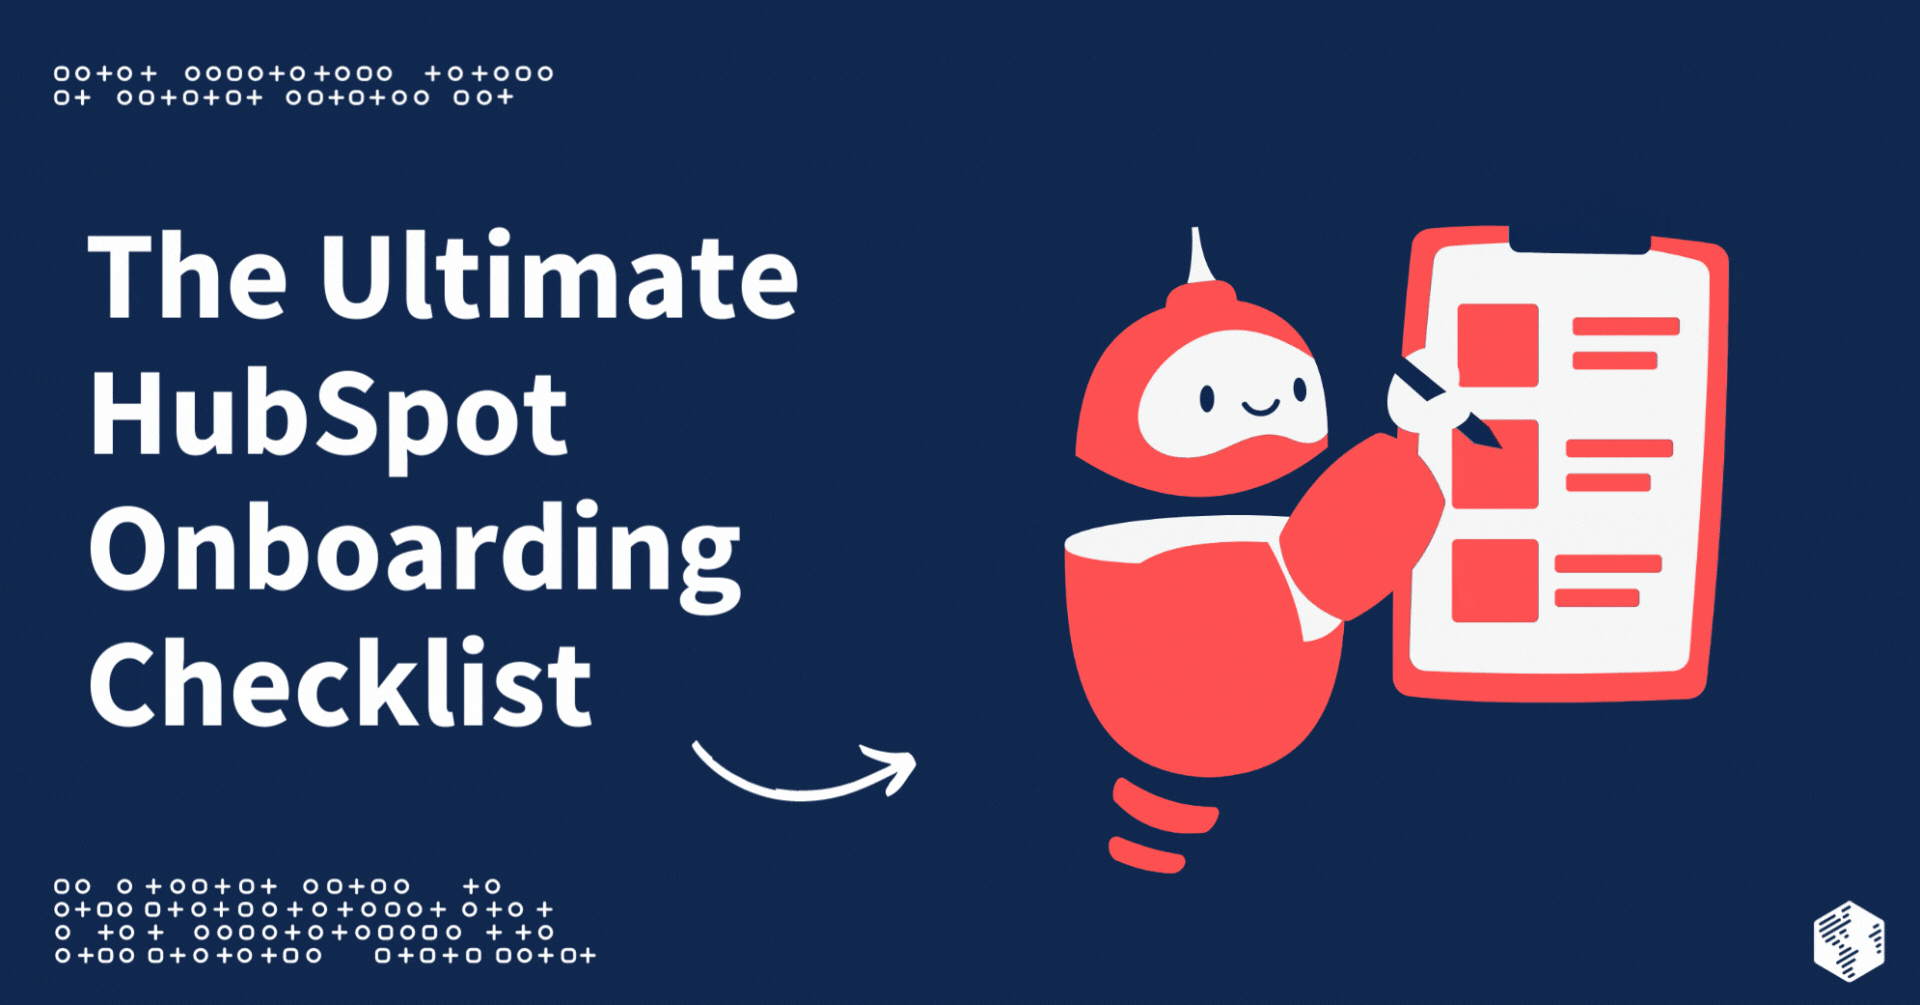 The Ultimate HubSpot Onboarding Checklist